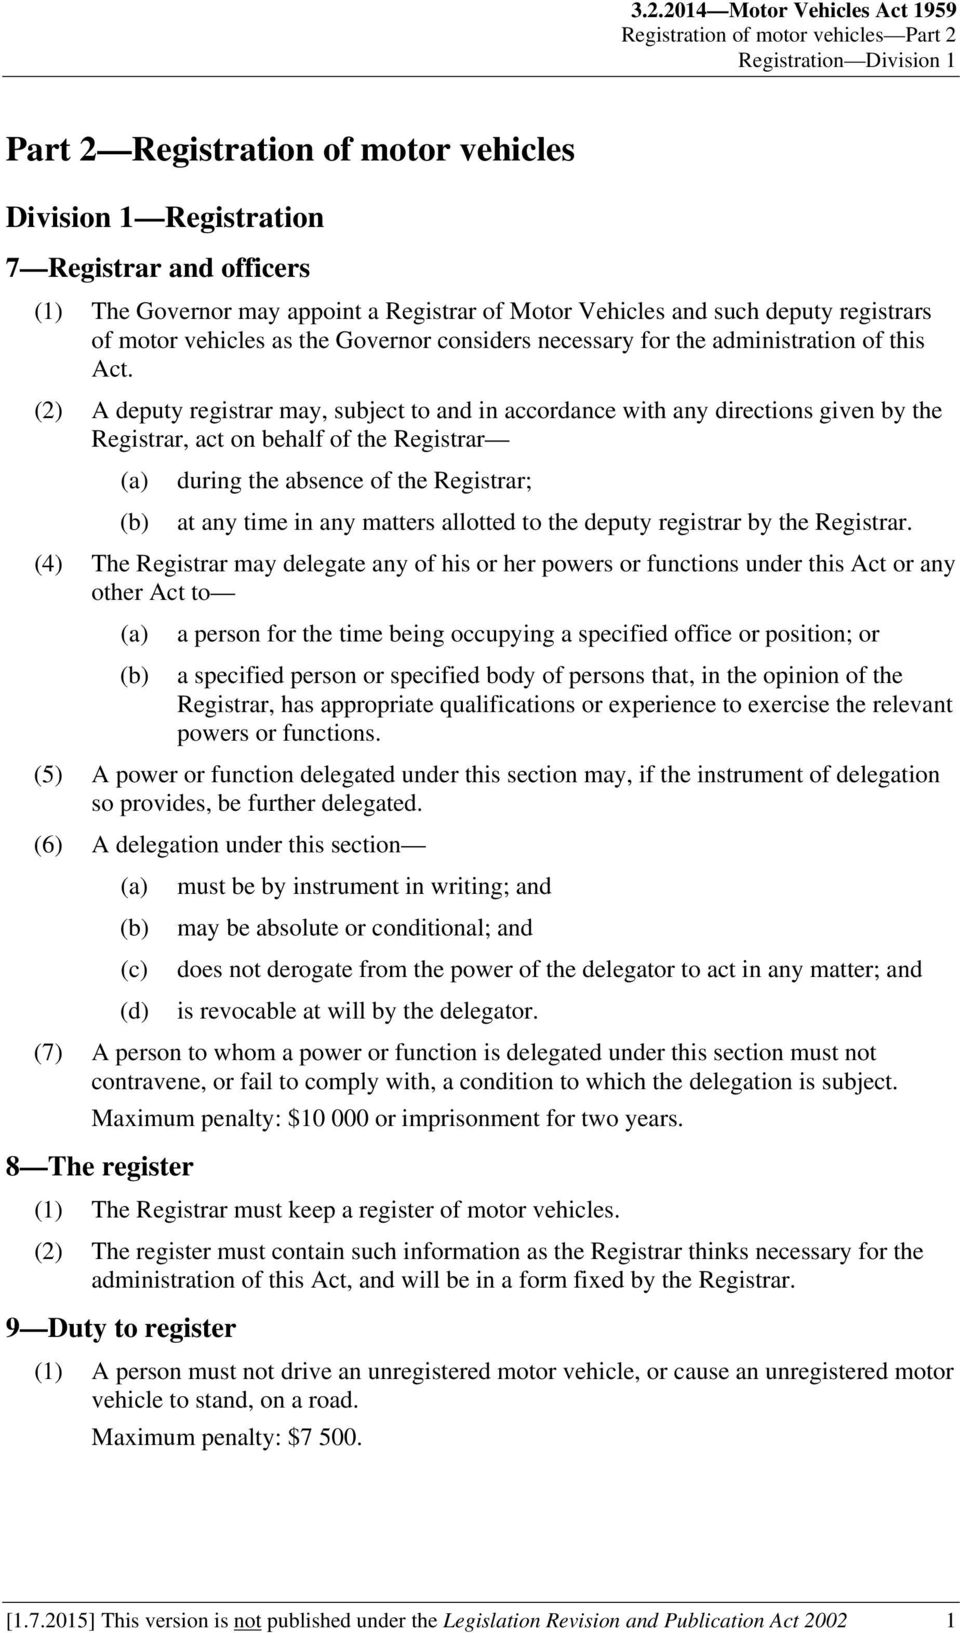 (2) A deputy registrar may, subject to and in accordance with any directions given by the Registrar, act on behalf of the Registrar during the absence of the Registrar; at any time in any matters